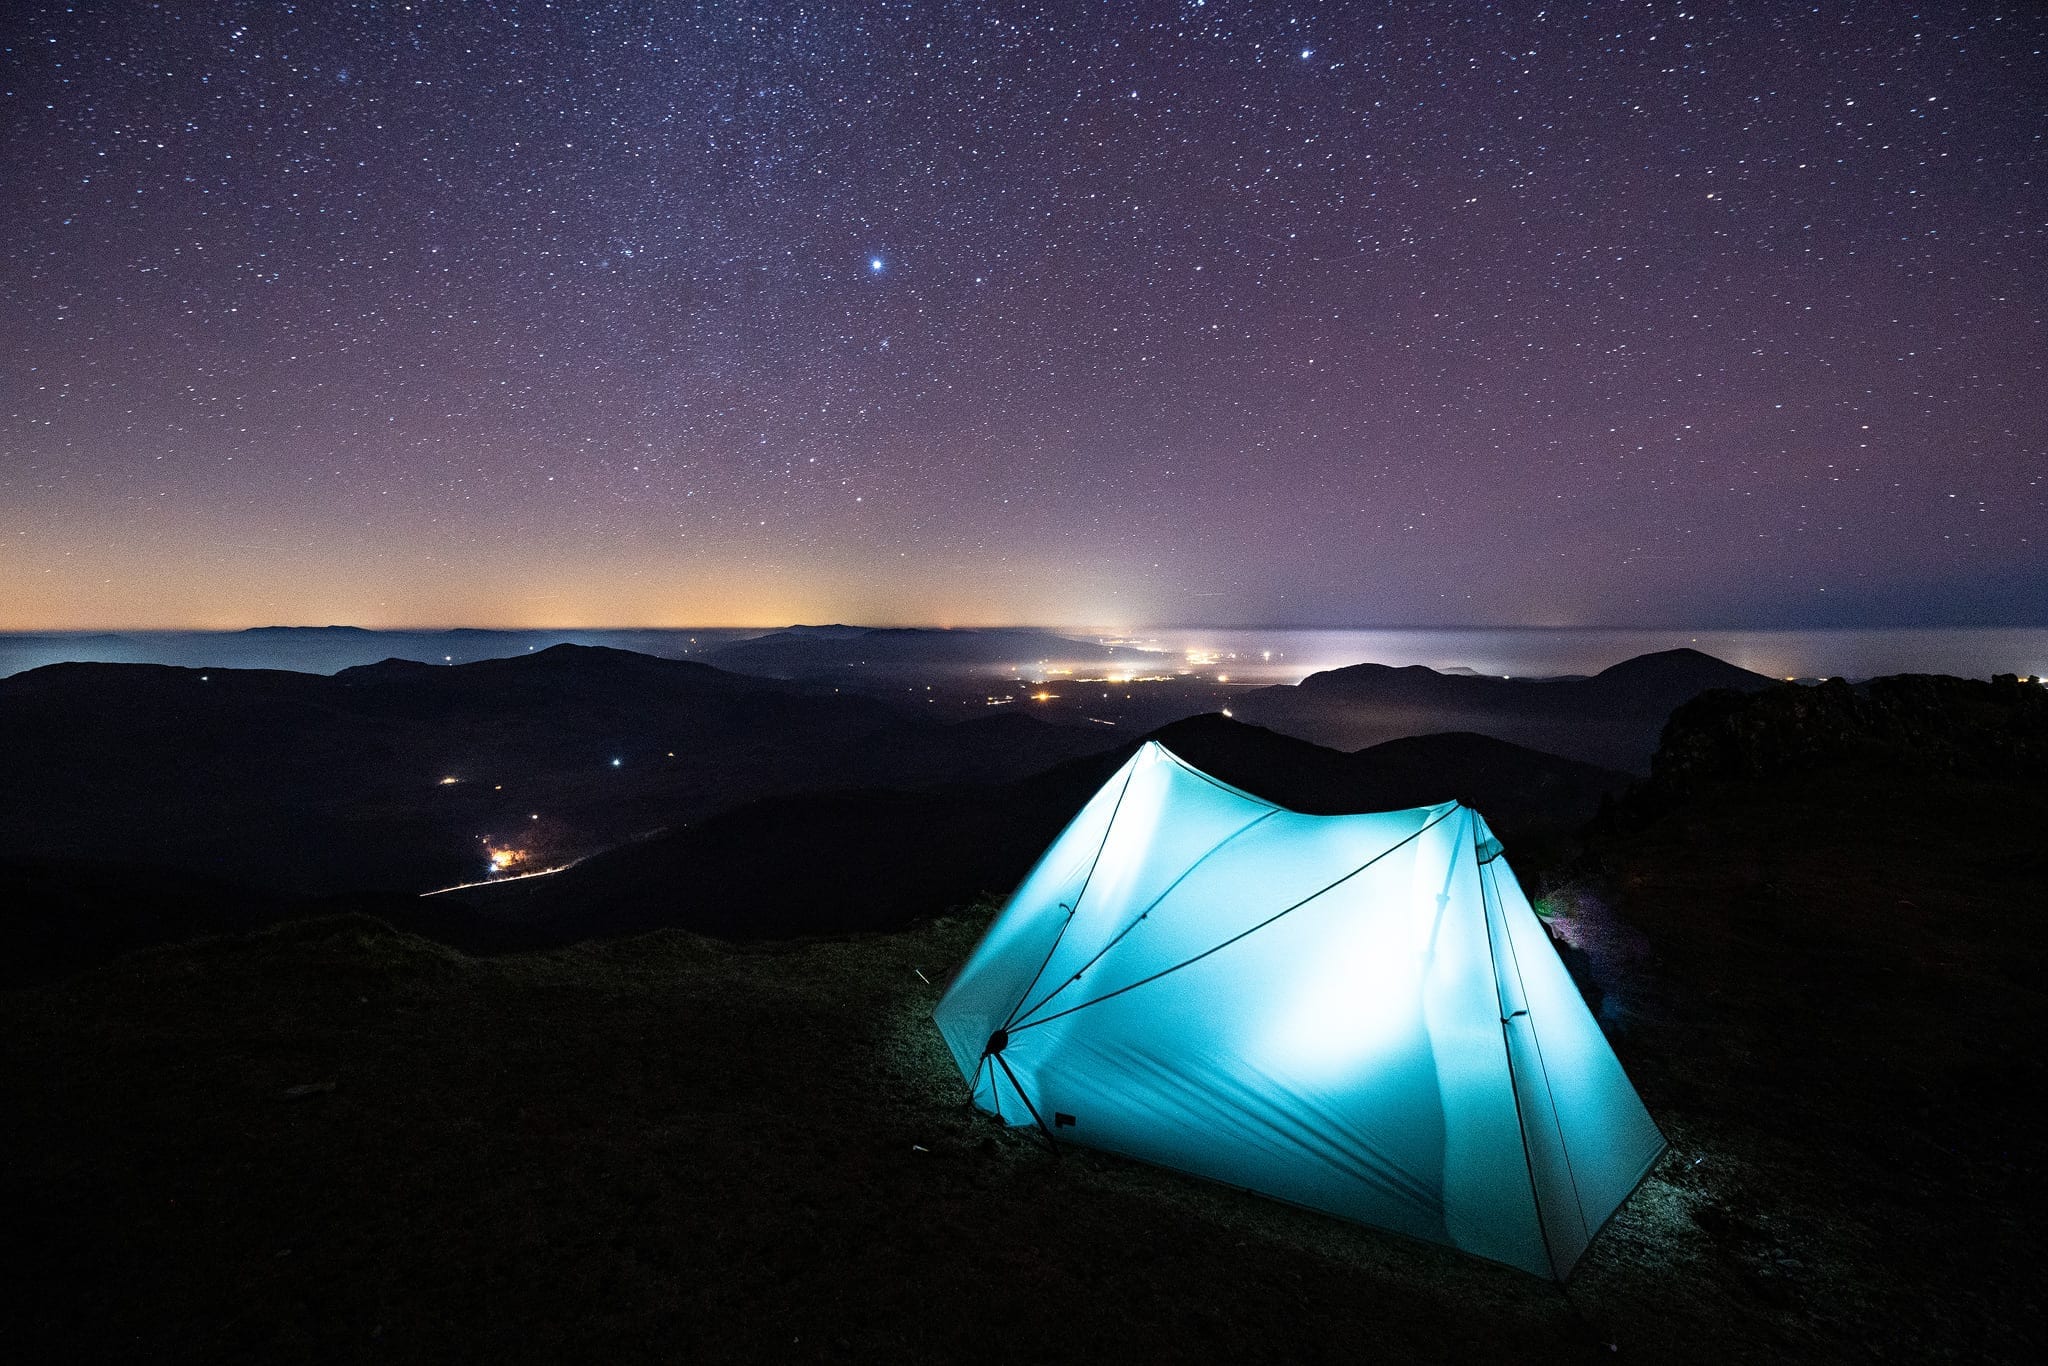 Tarptent Wild Camping on Snowdon - Snowdonia Wild Camping Photography Workshop